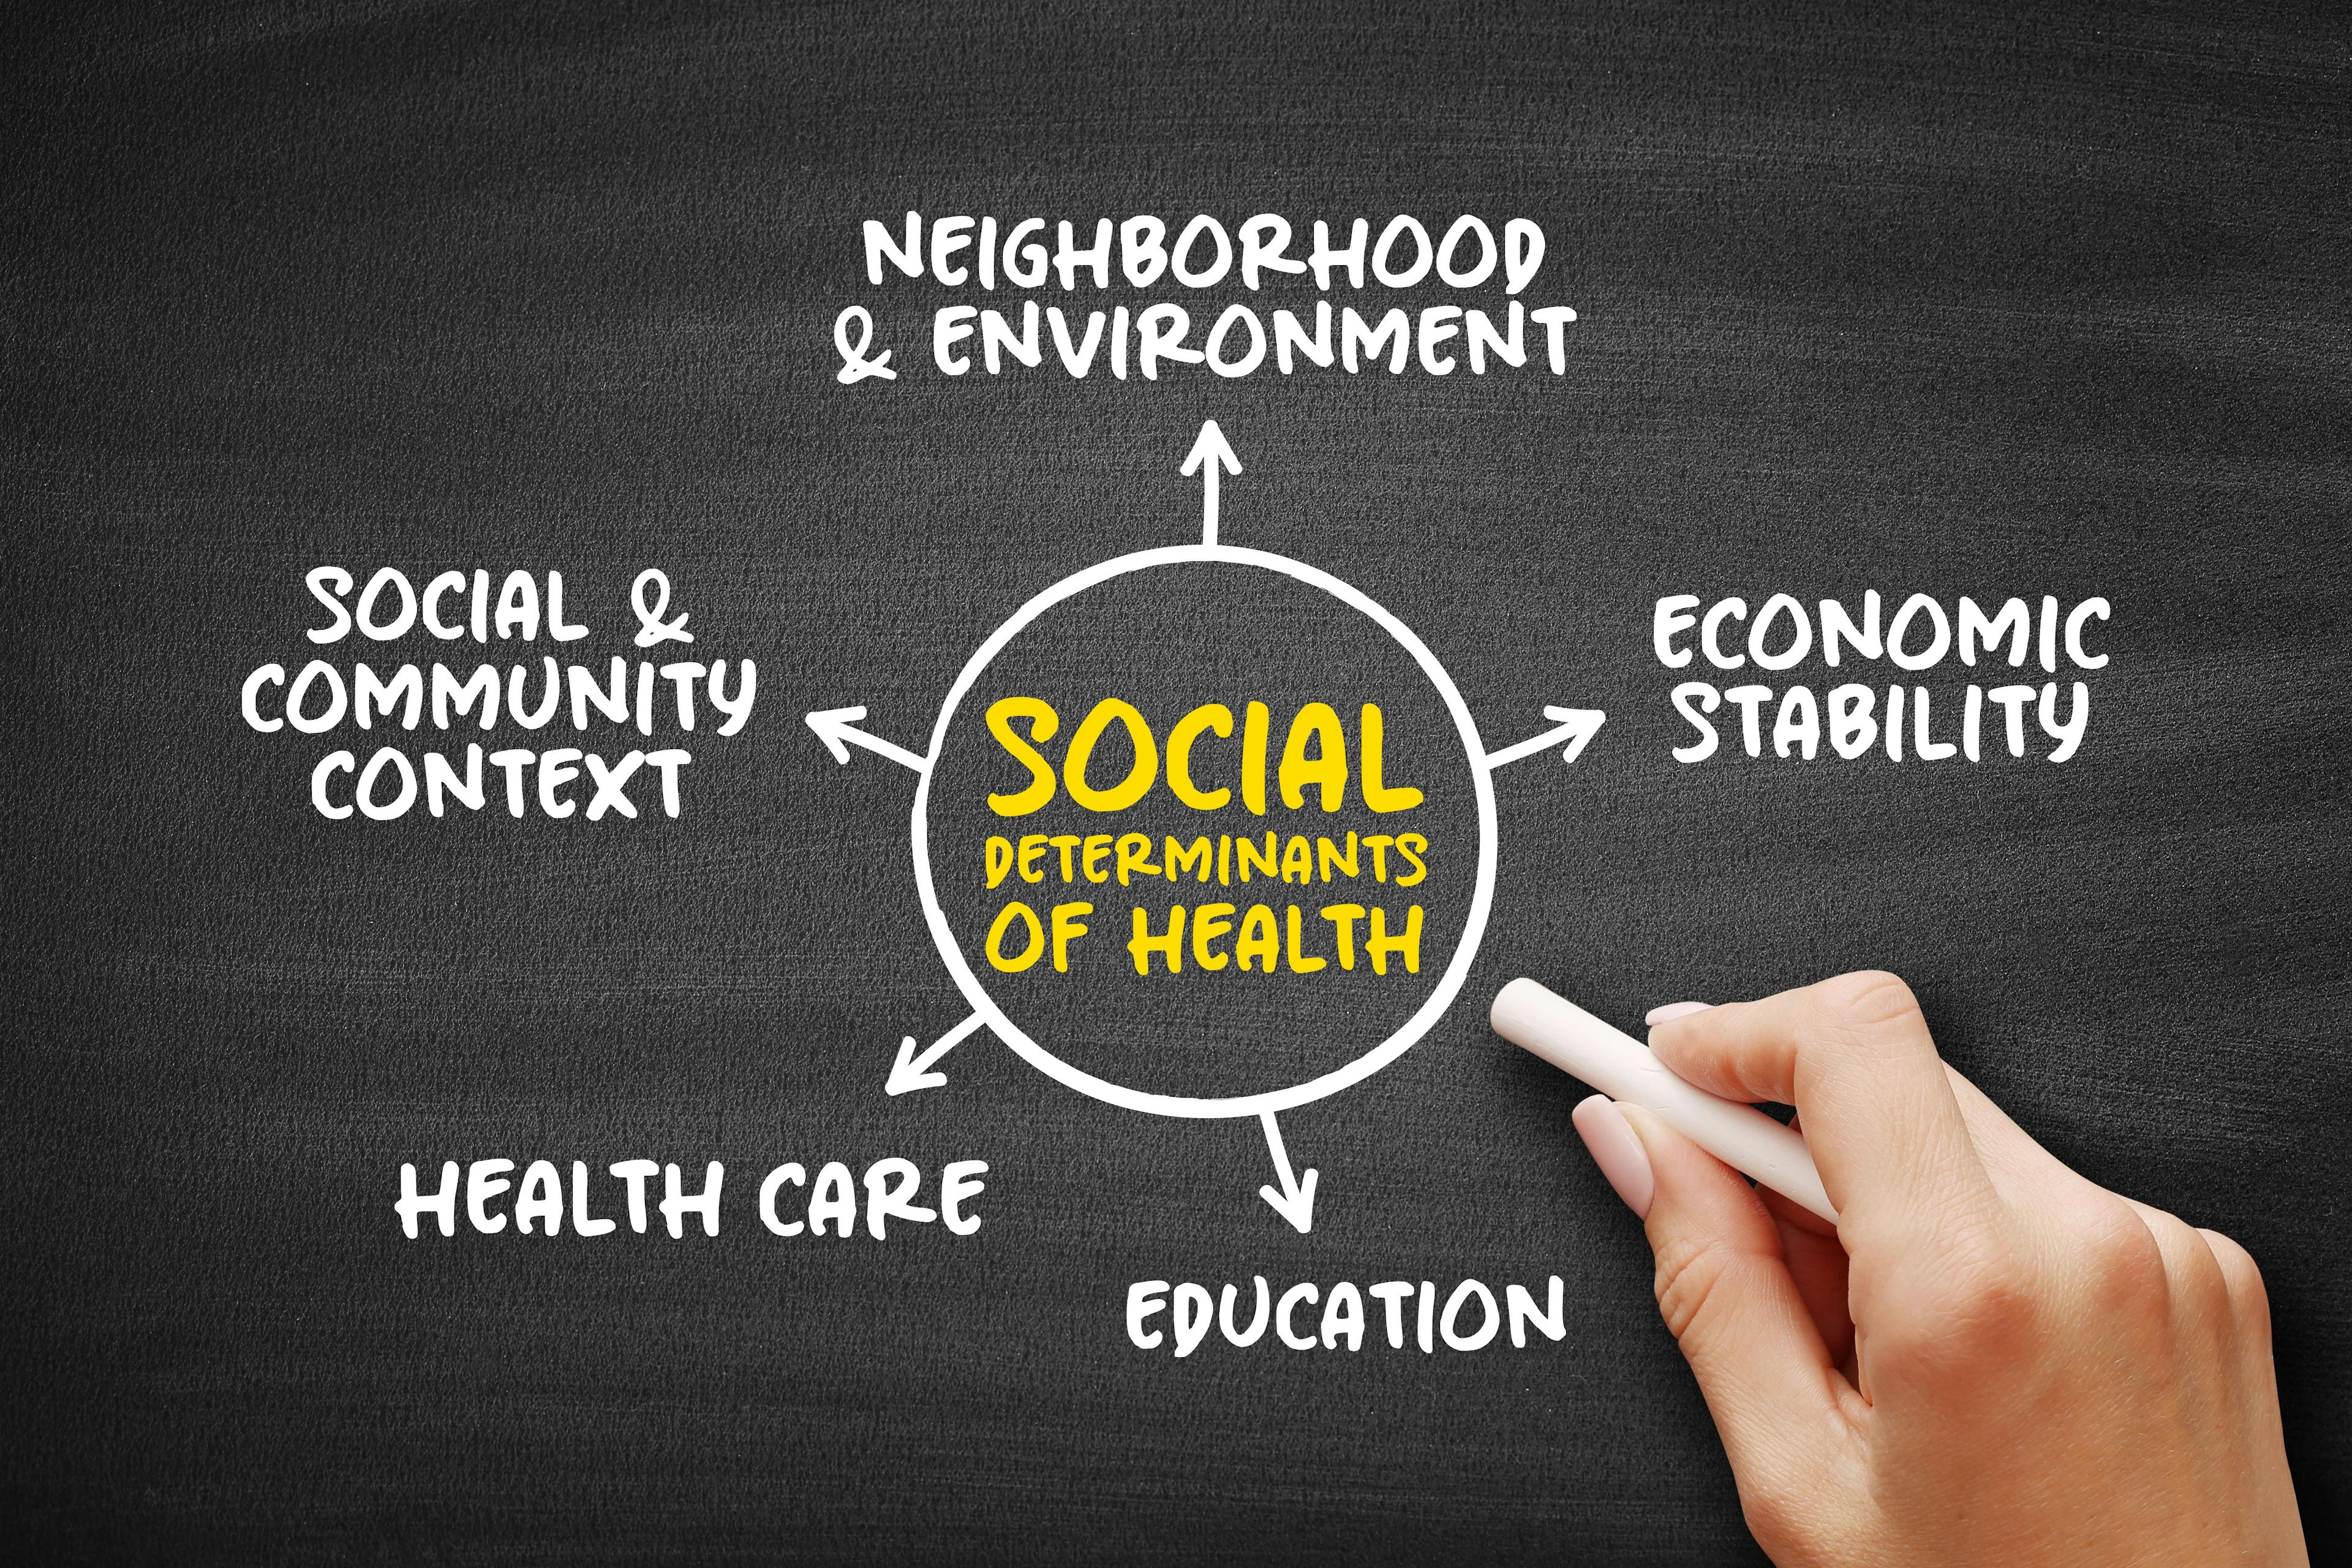 Social determinants of health - economic and social conditions that influence individual and group differences in health status. Credit: dizain - stock.adobe.com